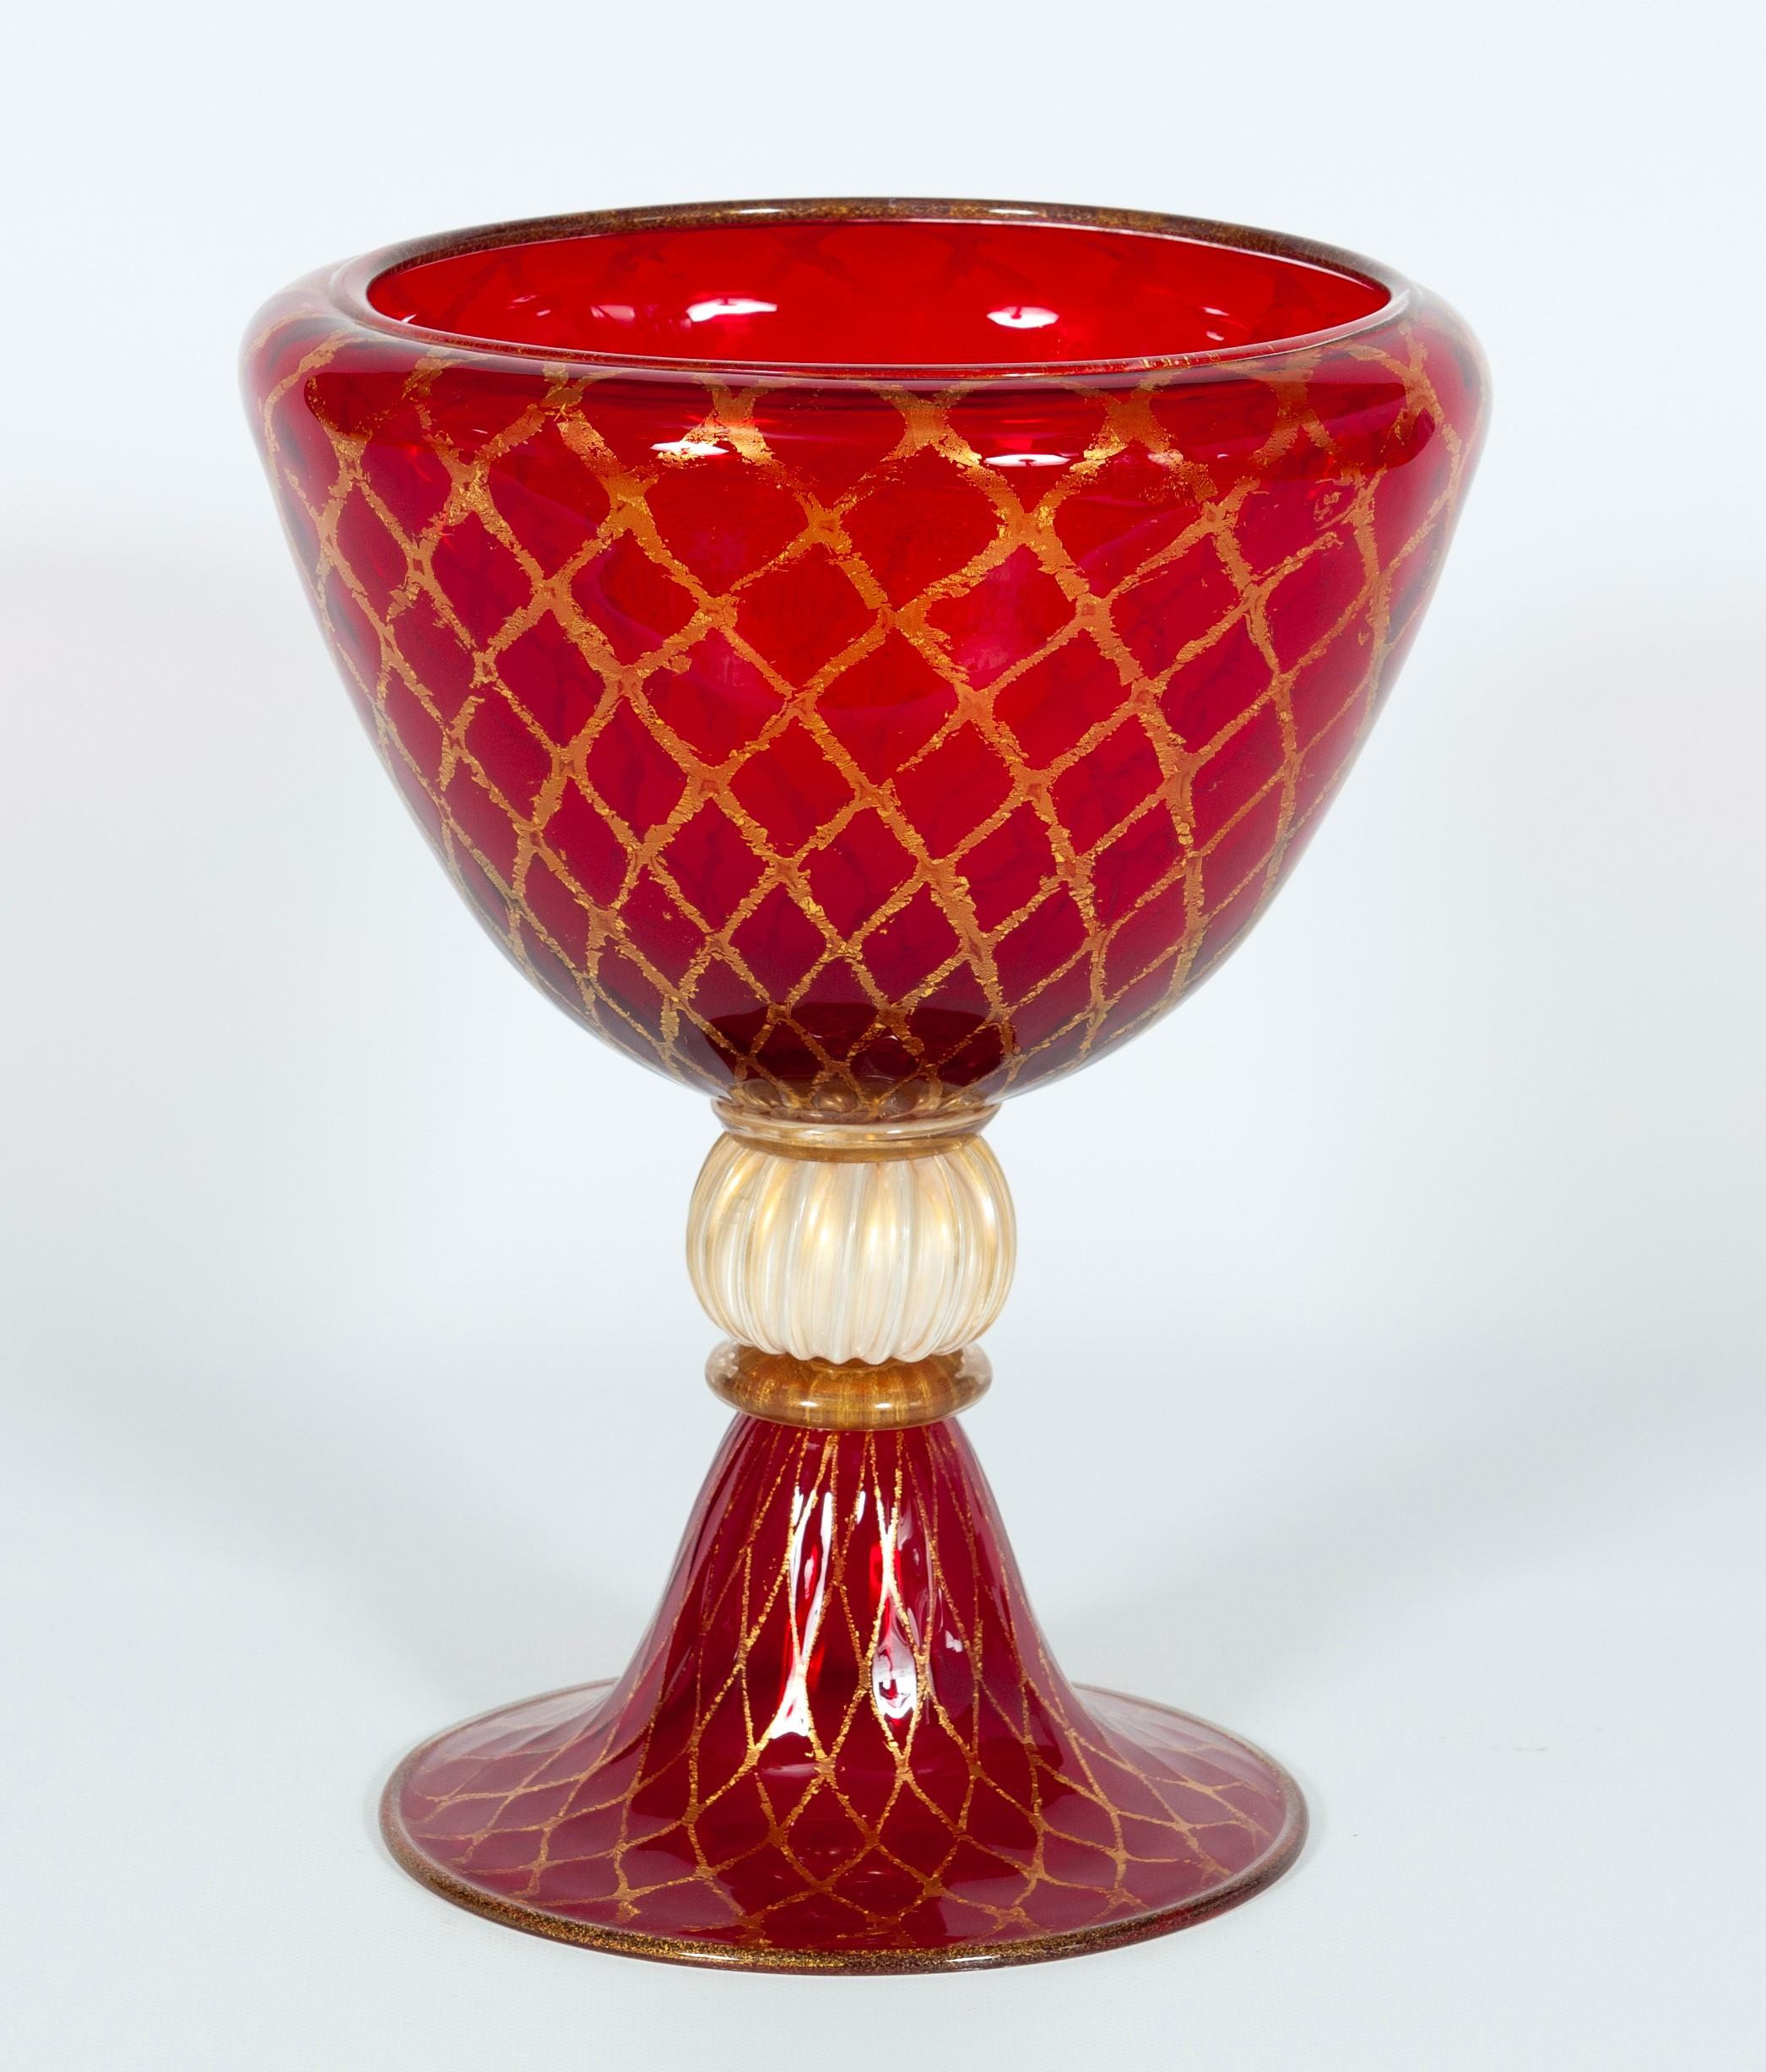 Ruby red bowl with 24-carat gold finishes in blown Murano glass, 1990s, Italy
This beautiful bowl is made with colorful ruby-red glass and gold rhombus patterns. The peculiar technique utilized to create the gold patterns is called (oro rotto)